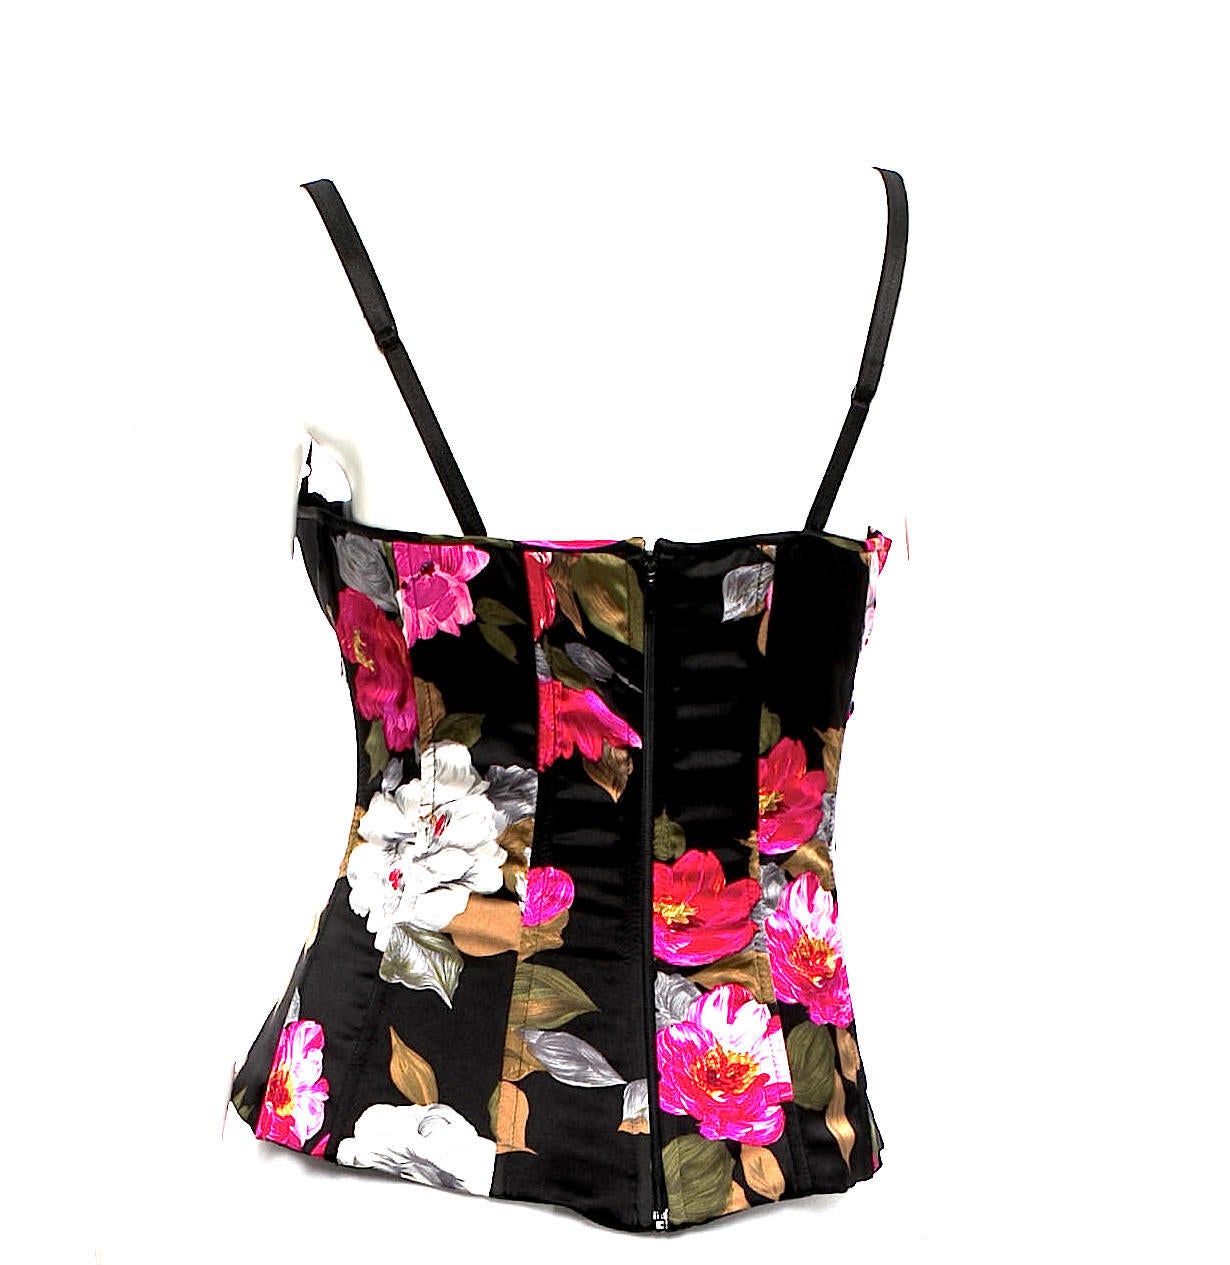 Black Dolce & Gabbana silk bustier top with fuchsia floral print, boning at lining, adjustable straps, and zip closure at center back.
Measurements: Bust 32”, Waist 30”, Length 20.5”